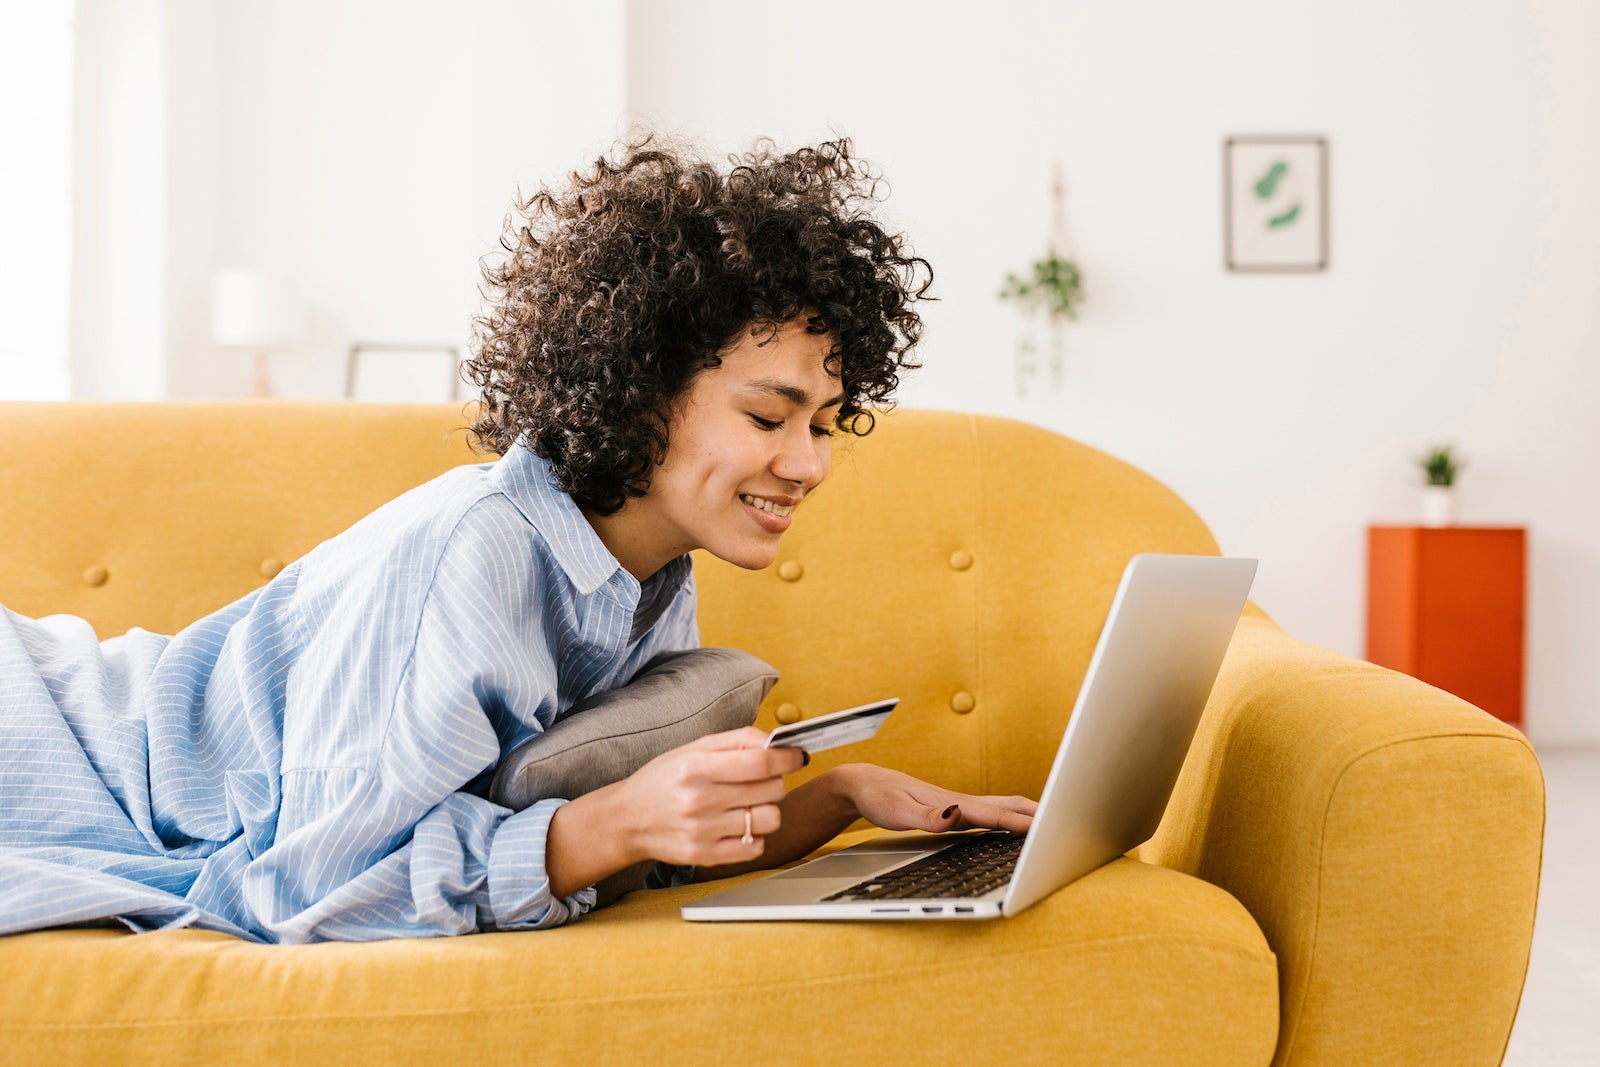 Smiling woman holding credit card using laptop lying on sofa in living room at home